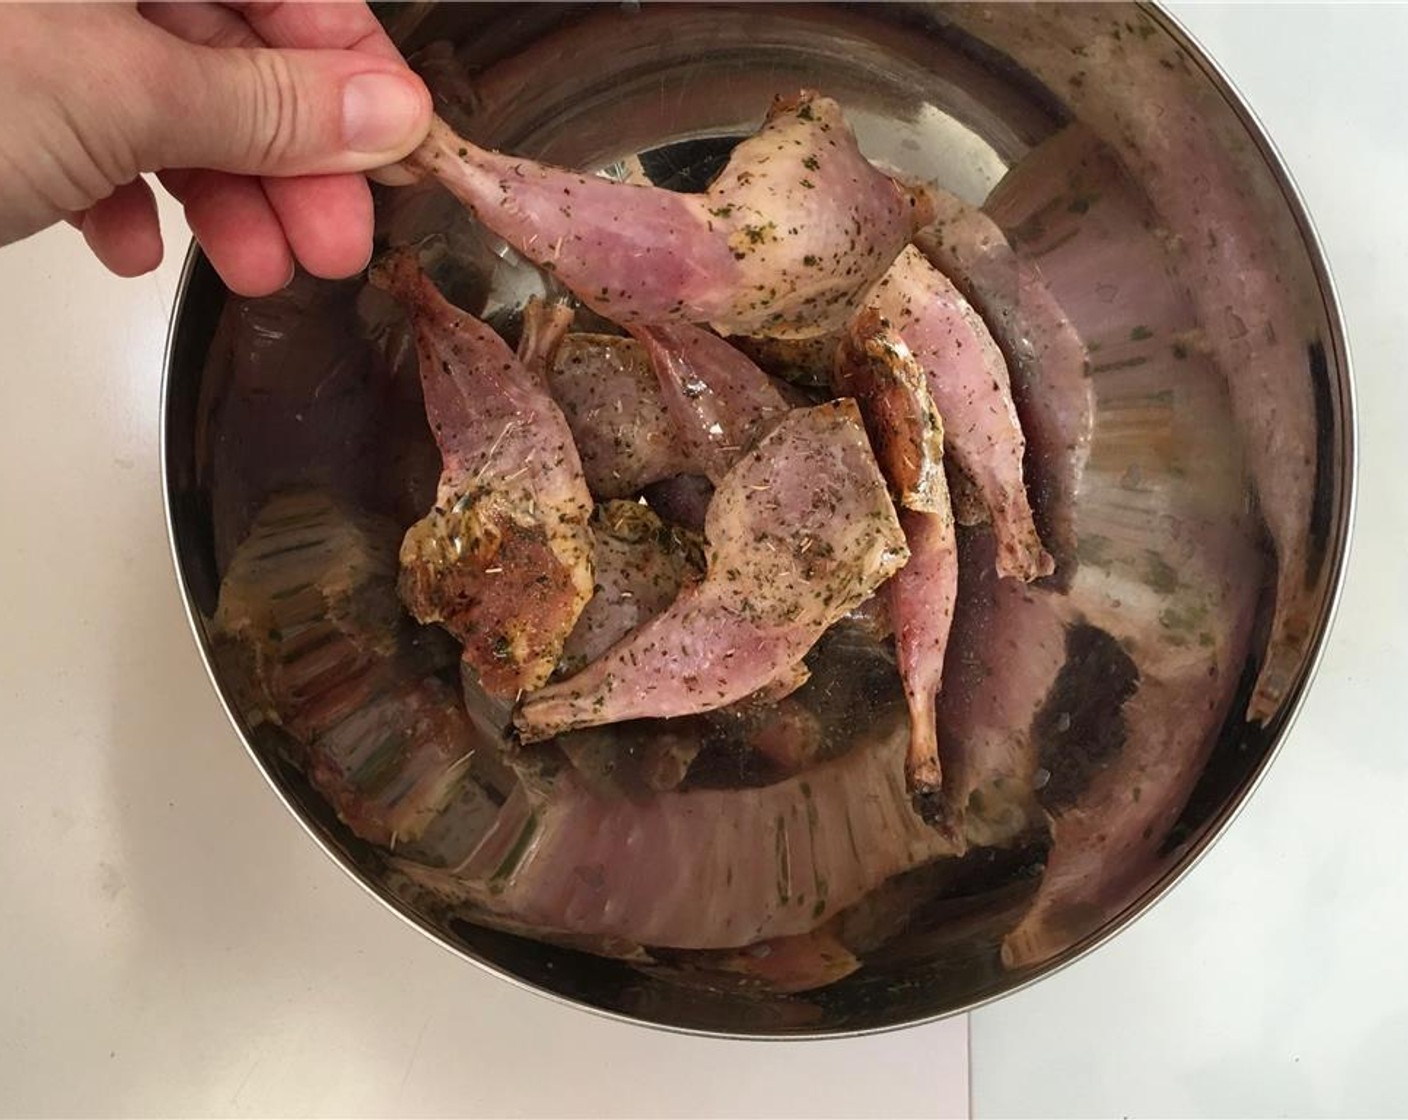 step 1 Transfer Quail Legs (10) to a mixing bowl and add Olive Oil (2 Tbsp) and Dried Thyme (1/2 tsp). Season with a pinch of Salt (to taste) and Ground Black Pepper (to taste).